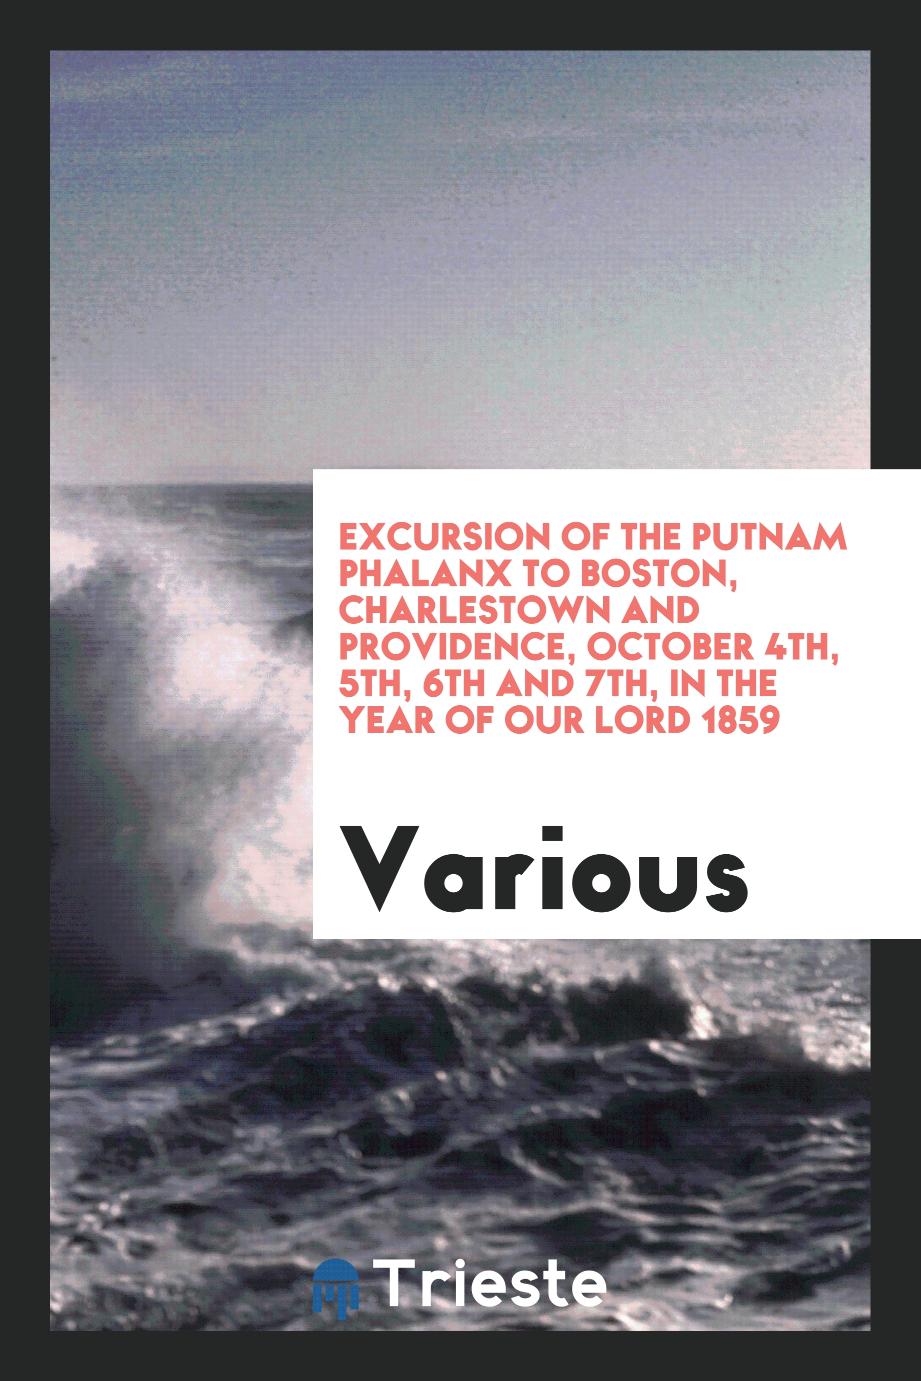 Excursion of the Putnam Phalanx to Boston, Charlestown and Providence, October 4th, 5th, 6th and 7th, in the Year of Our Lord 1859